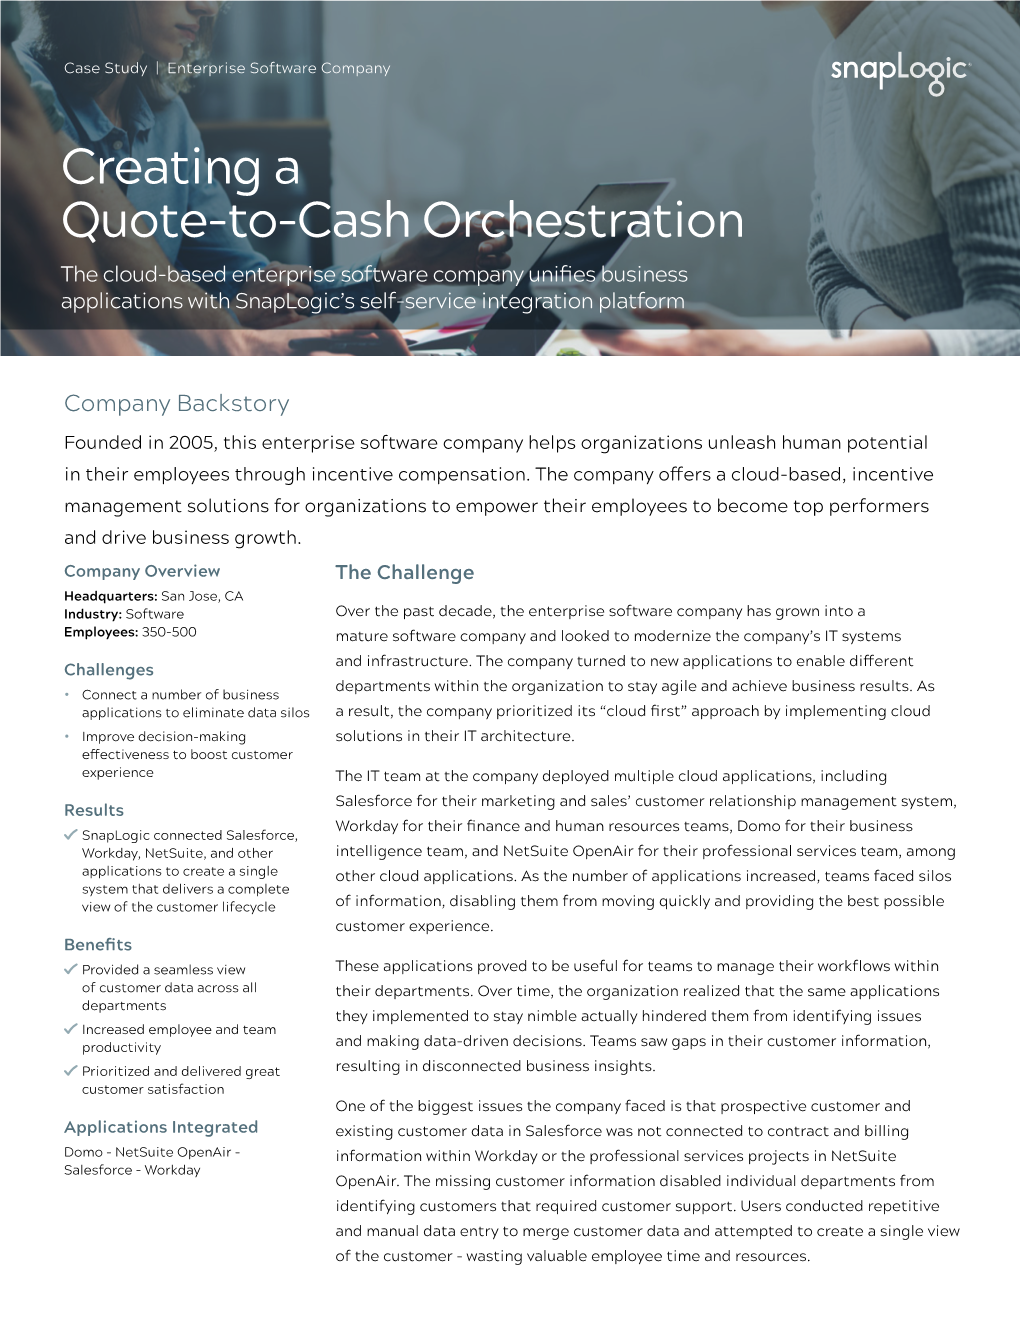 Creating a Quote-To-Cash Orchestration the Cloud-Based Enterprise Software Company Unifies Business Applications with Snaplogic’S Self-Service Integration Platform